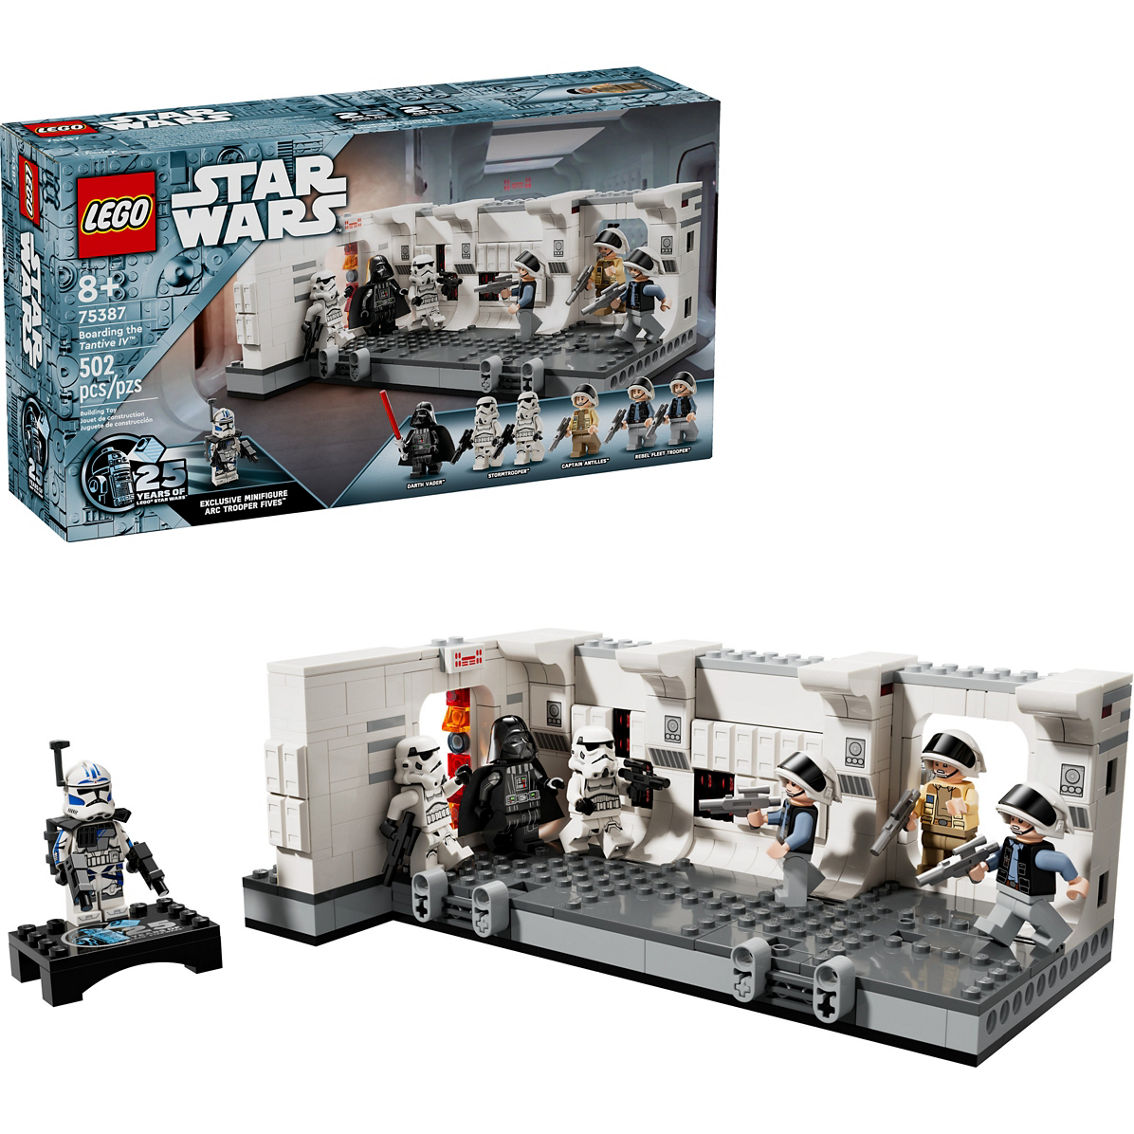 LEGO Star Wars Boarding the Tantive IV Playset 75387 - Image 3 of 10